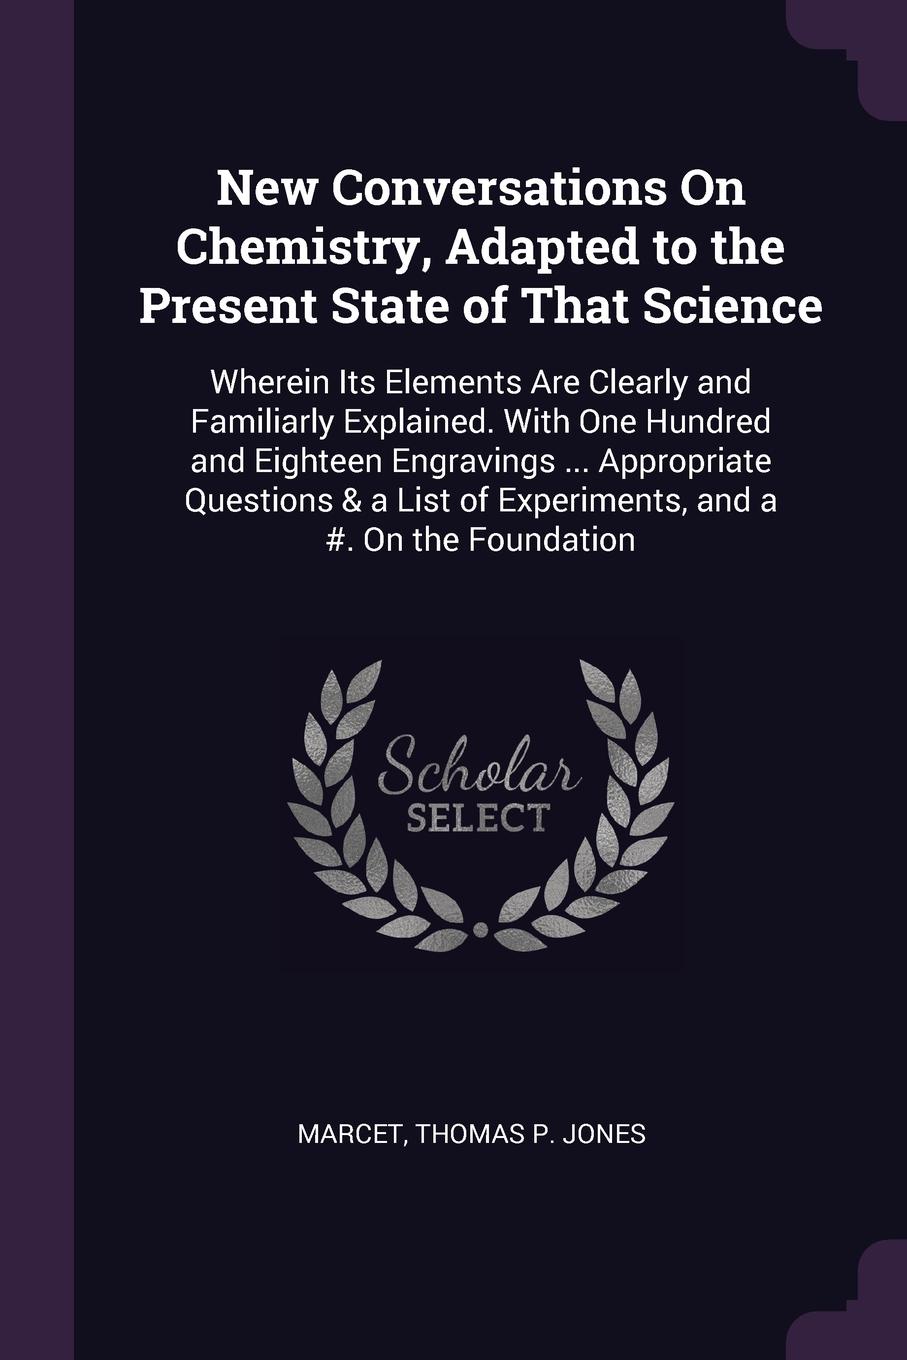 New Conversations On Chemistry, Adapted to the Present State of That Science. Wherein Its Elements Are Clearly and Familiarly Explained. With One Hundred and Eighteen Engravings ... Appropriate Questions & a List of Experiments, and a #. On the Fo...